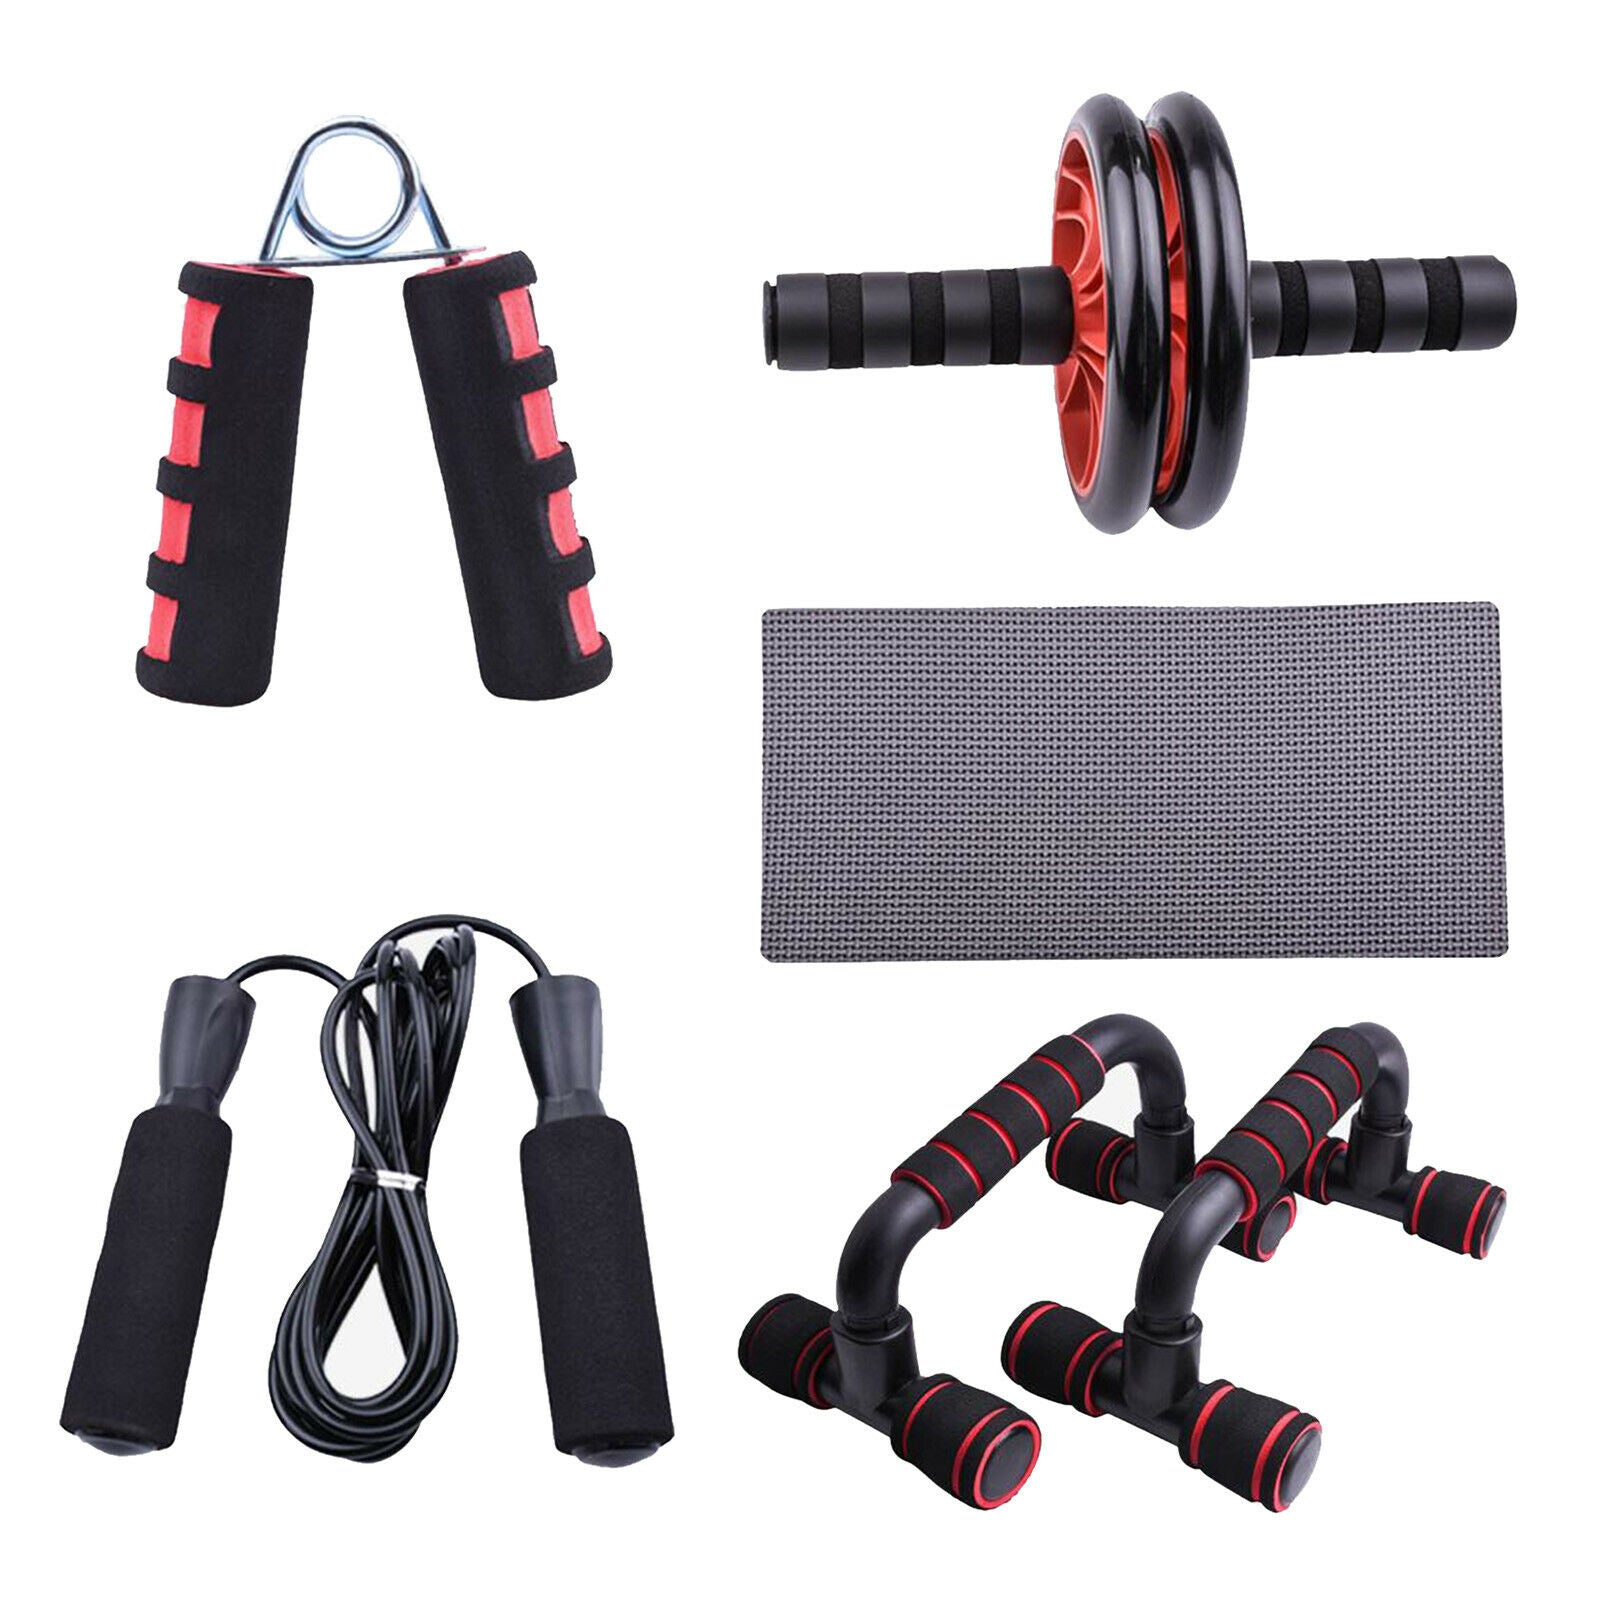 5pcs  Wheel + Workout Equipment Set for Abdominal Exercise Home Gym